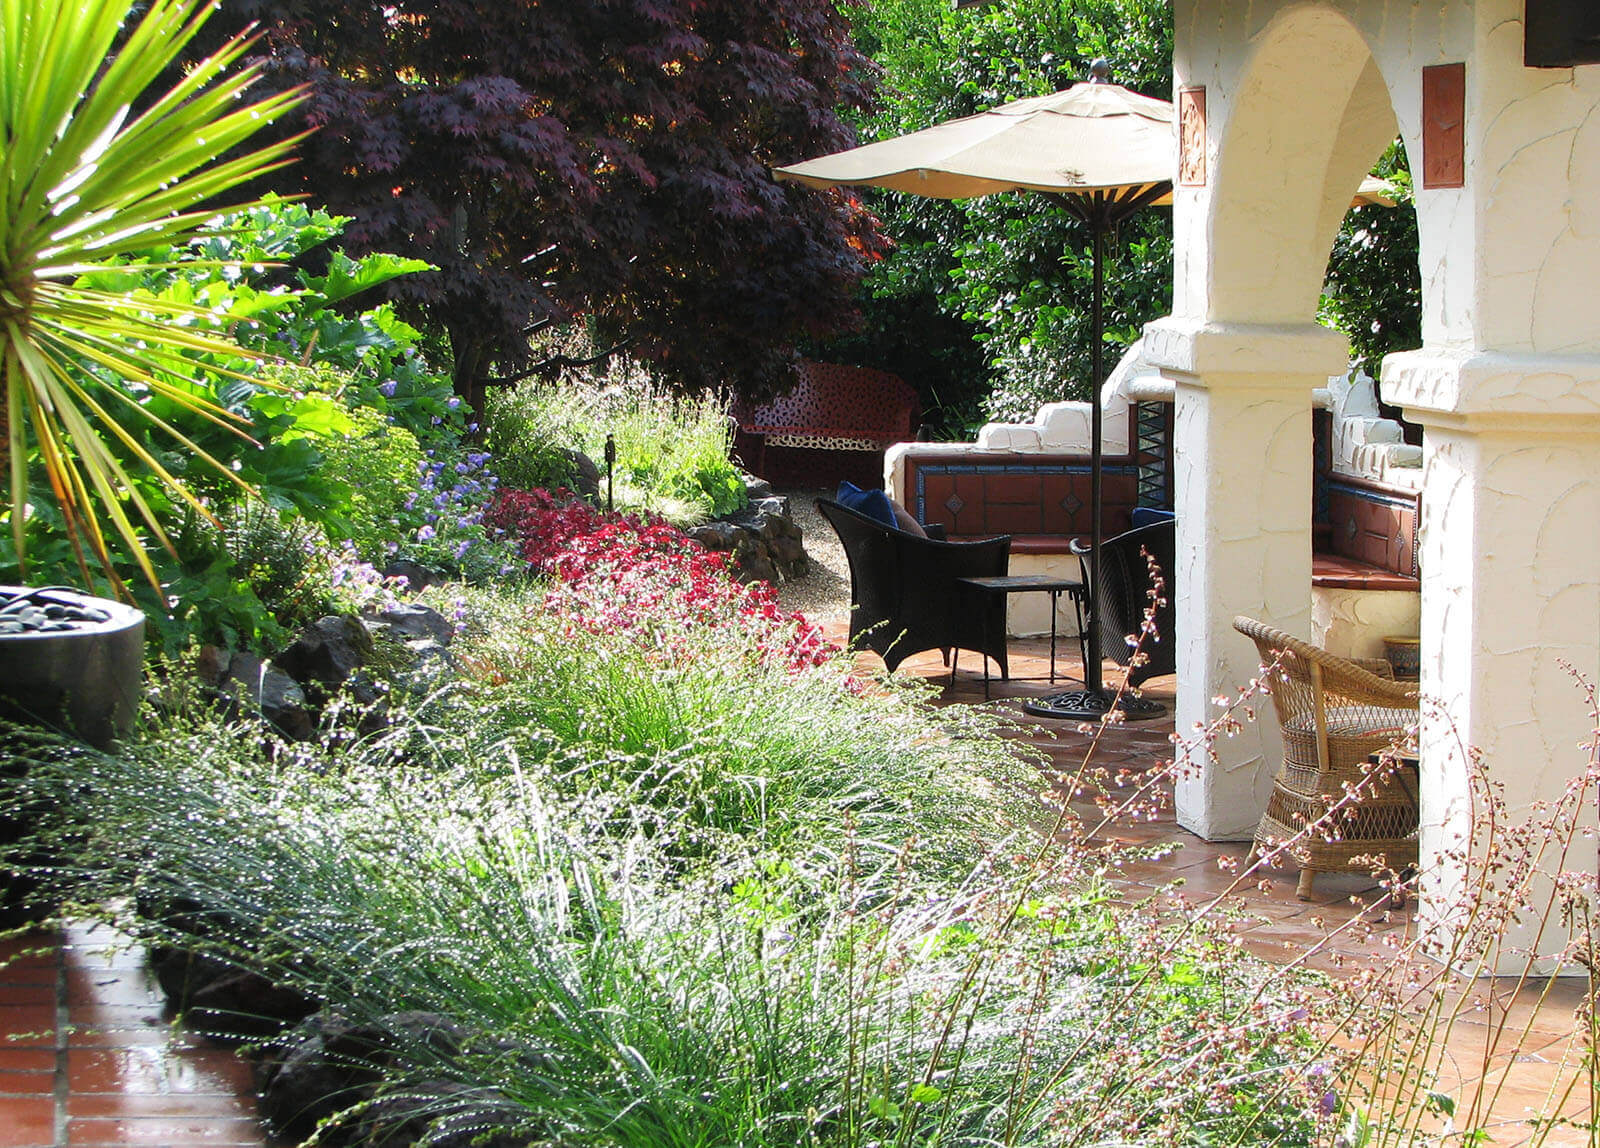 Diverse and colorful garden surrounding a shaded brick tile patio